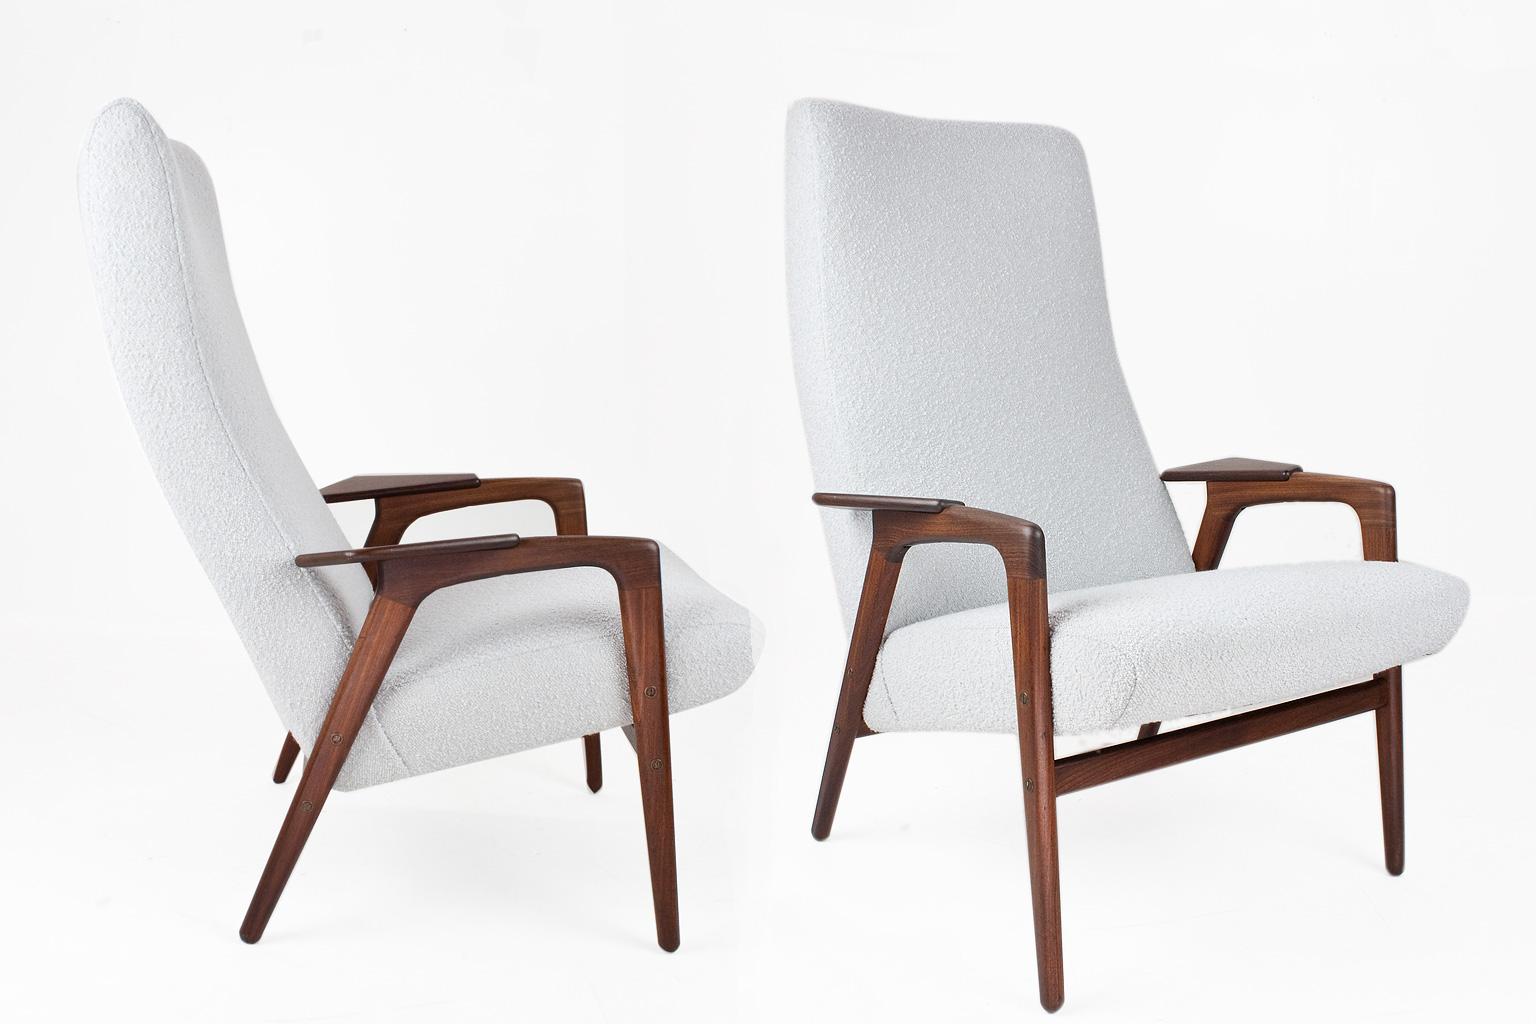 Pair of high back armchairs, model Ruster or Mingo, in teak with a new light grey upholstery (fabric and fillings). This Ekstrom Design has a high back with elegant flared armrests. The frame is solid teak and in very good condition. 

This lounge